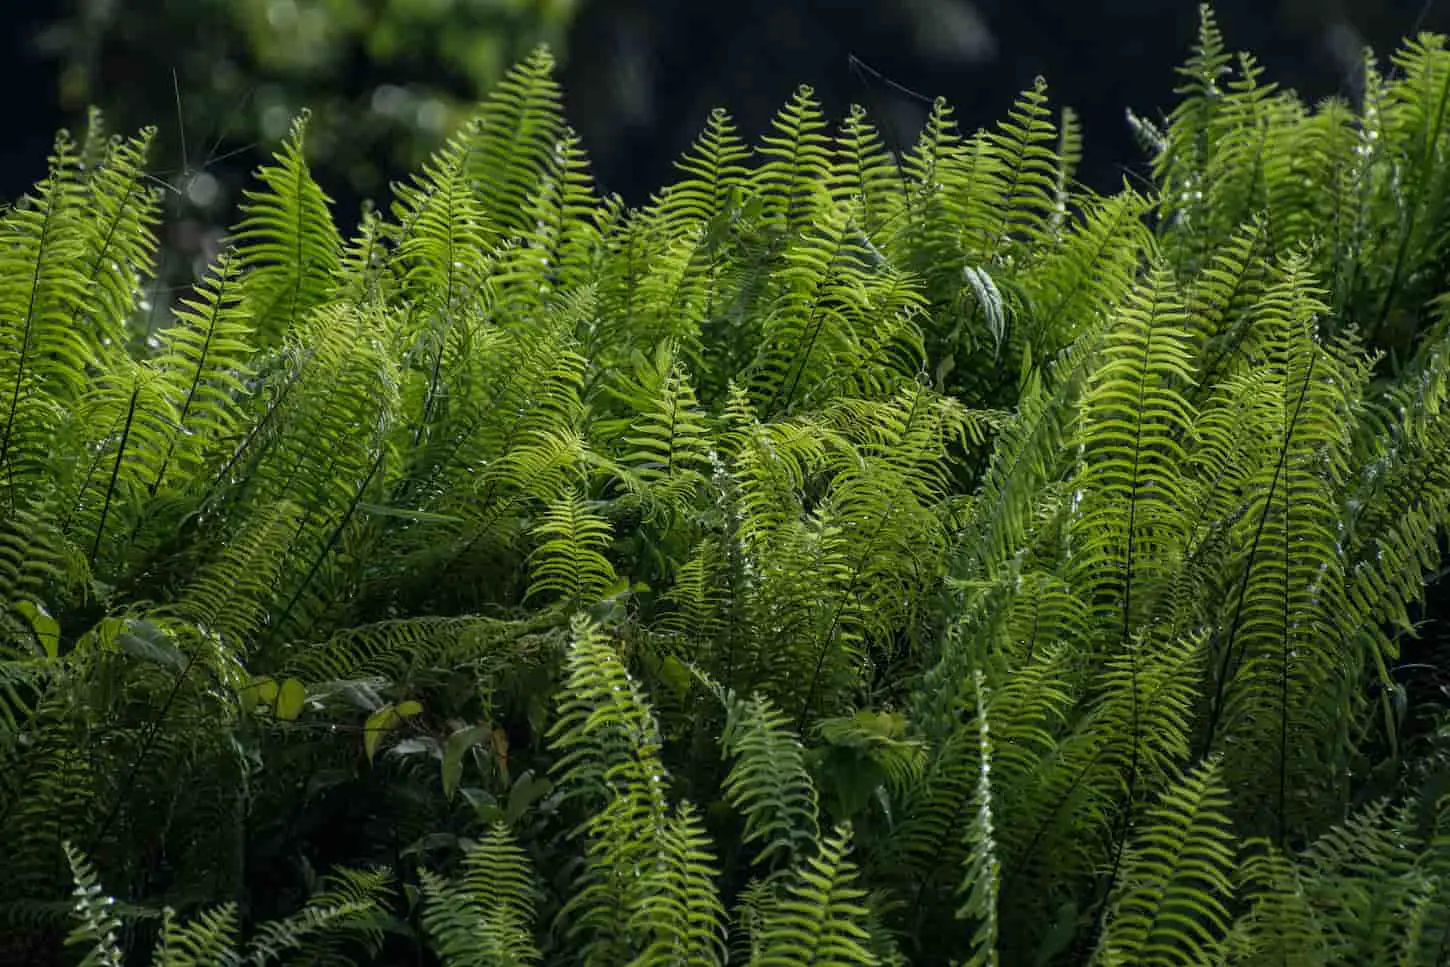 An image of fern plants in the natural background.